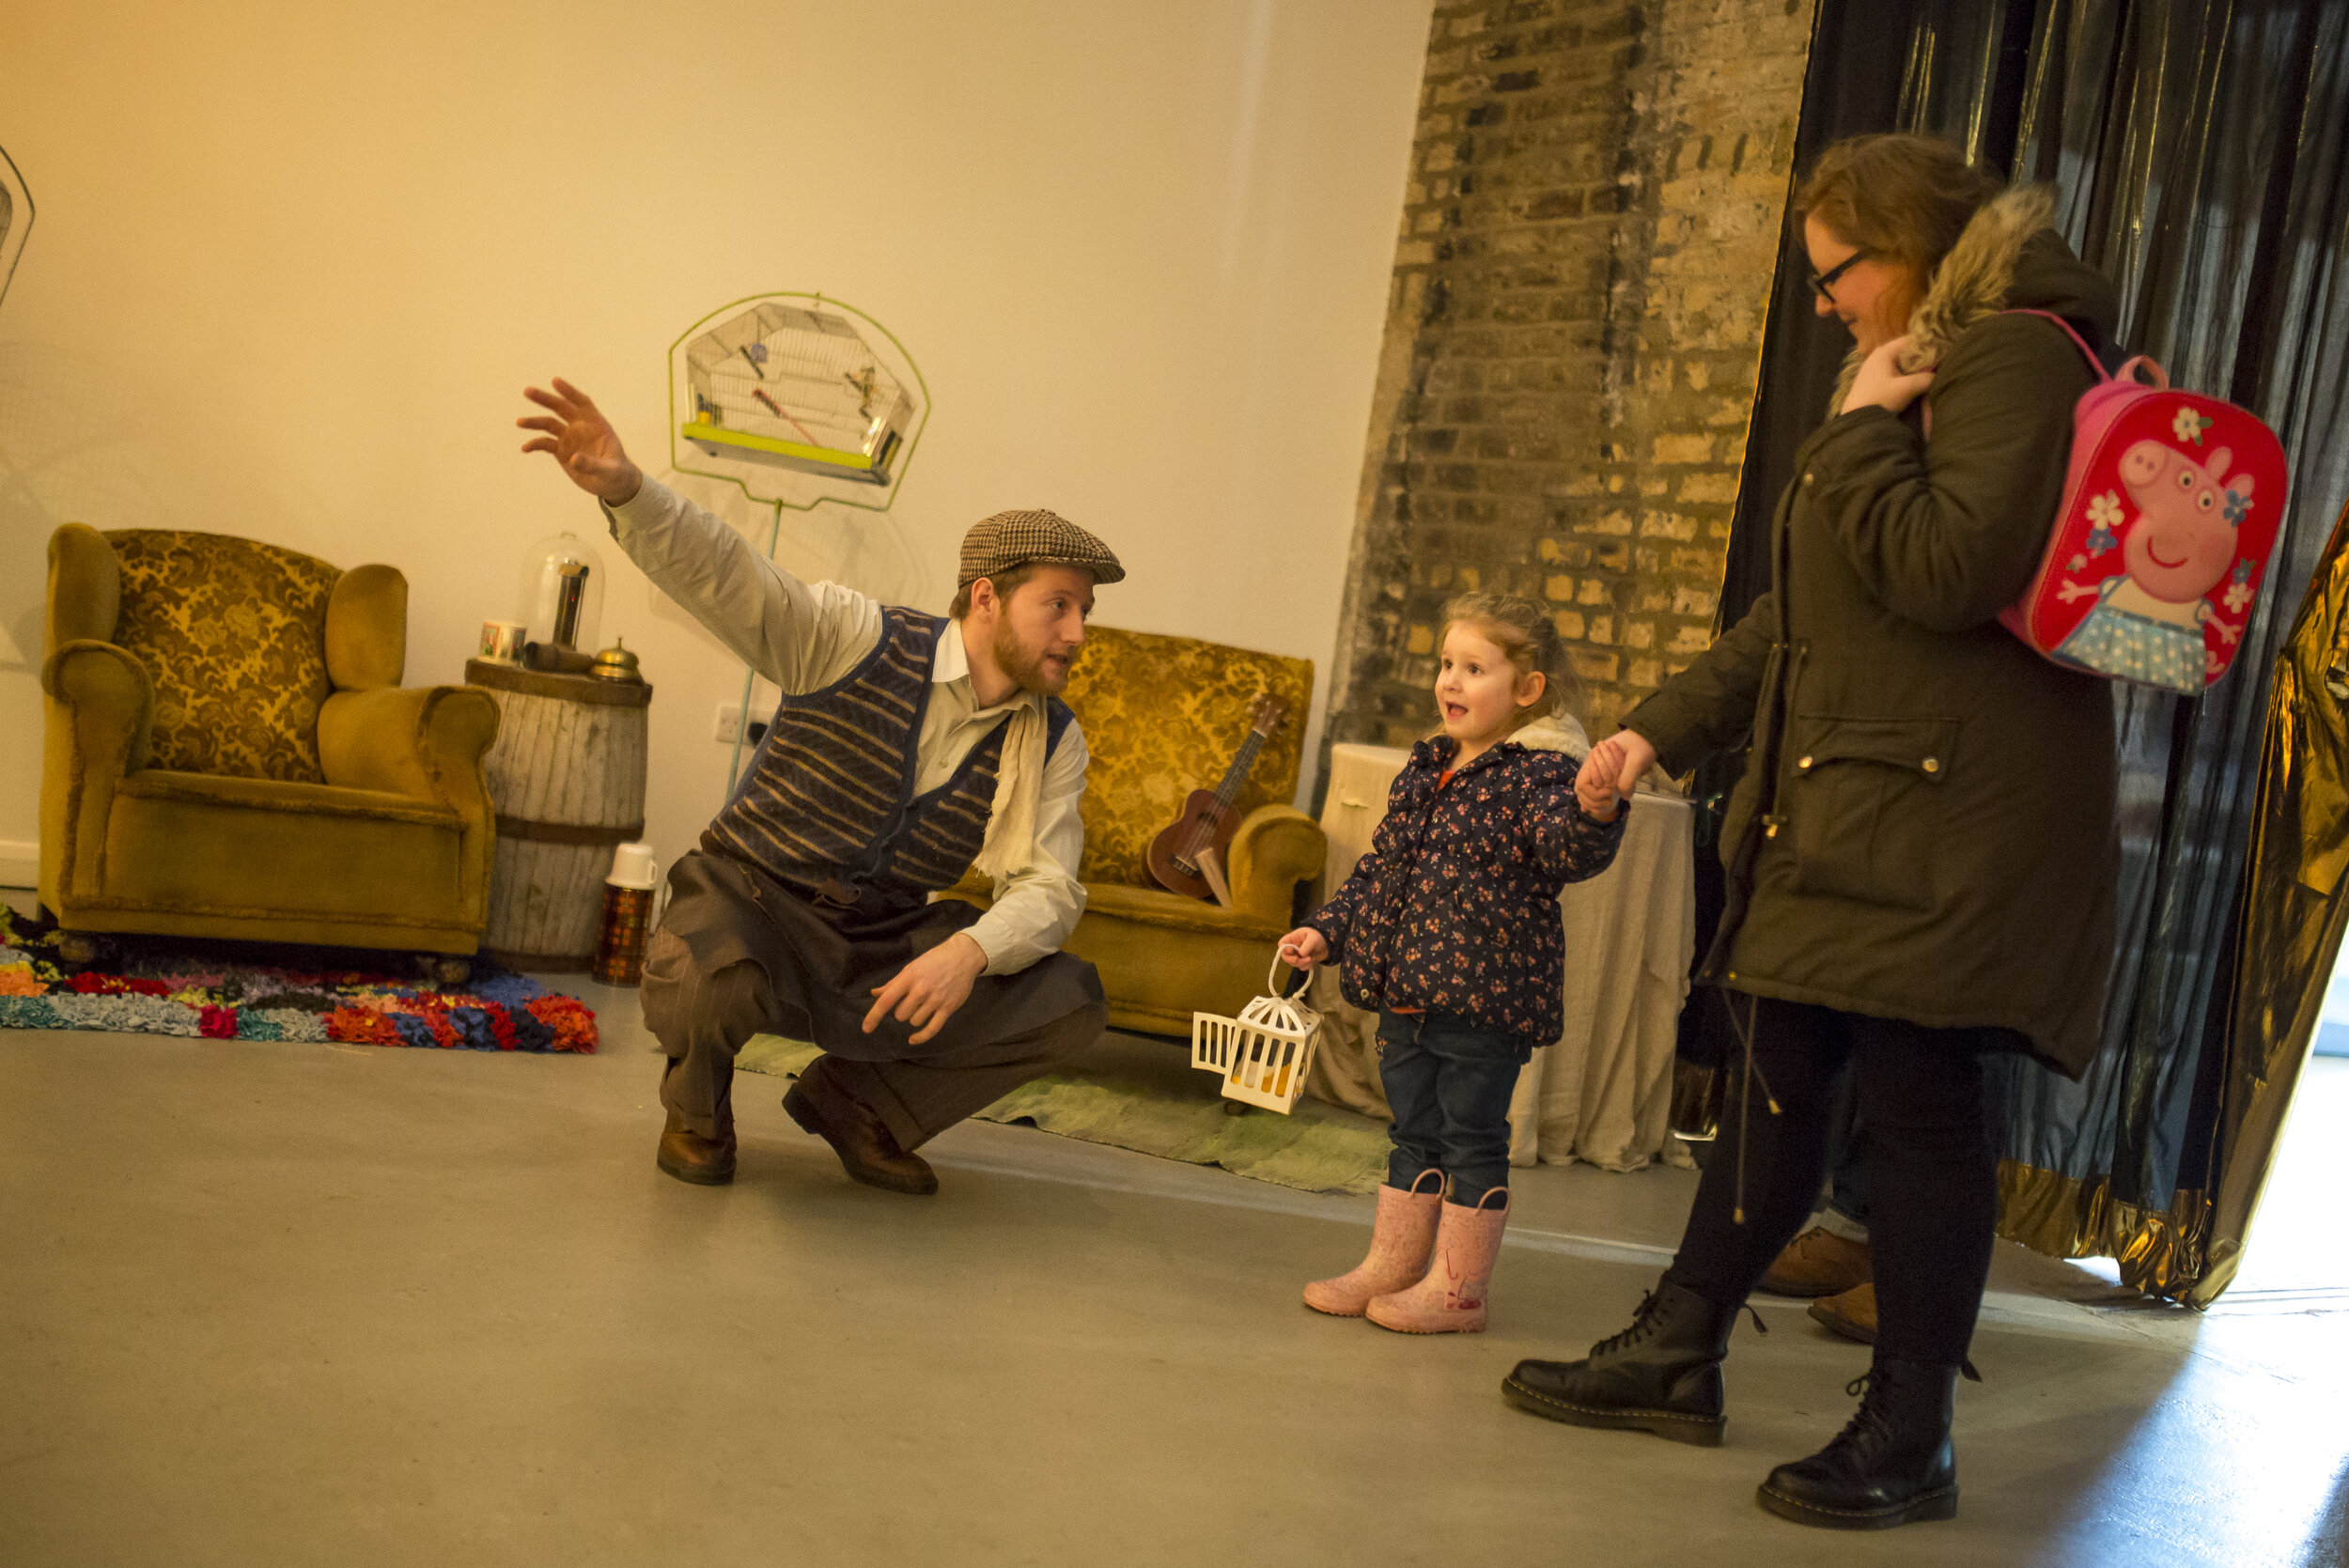  A man wearing a flat-cap explains to a child holding her mothers hand. 